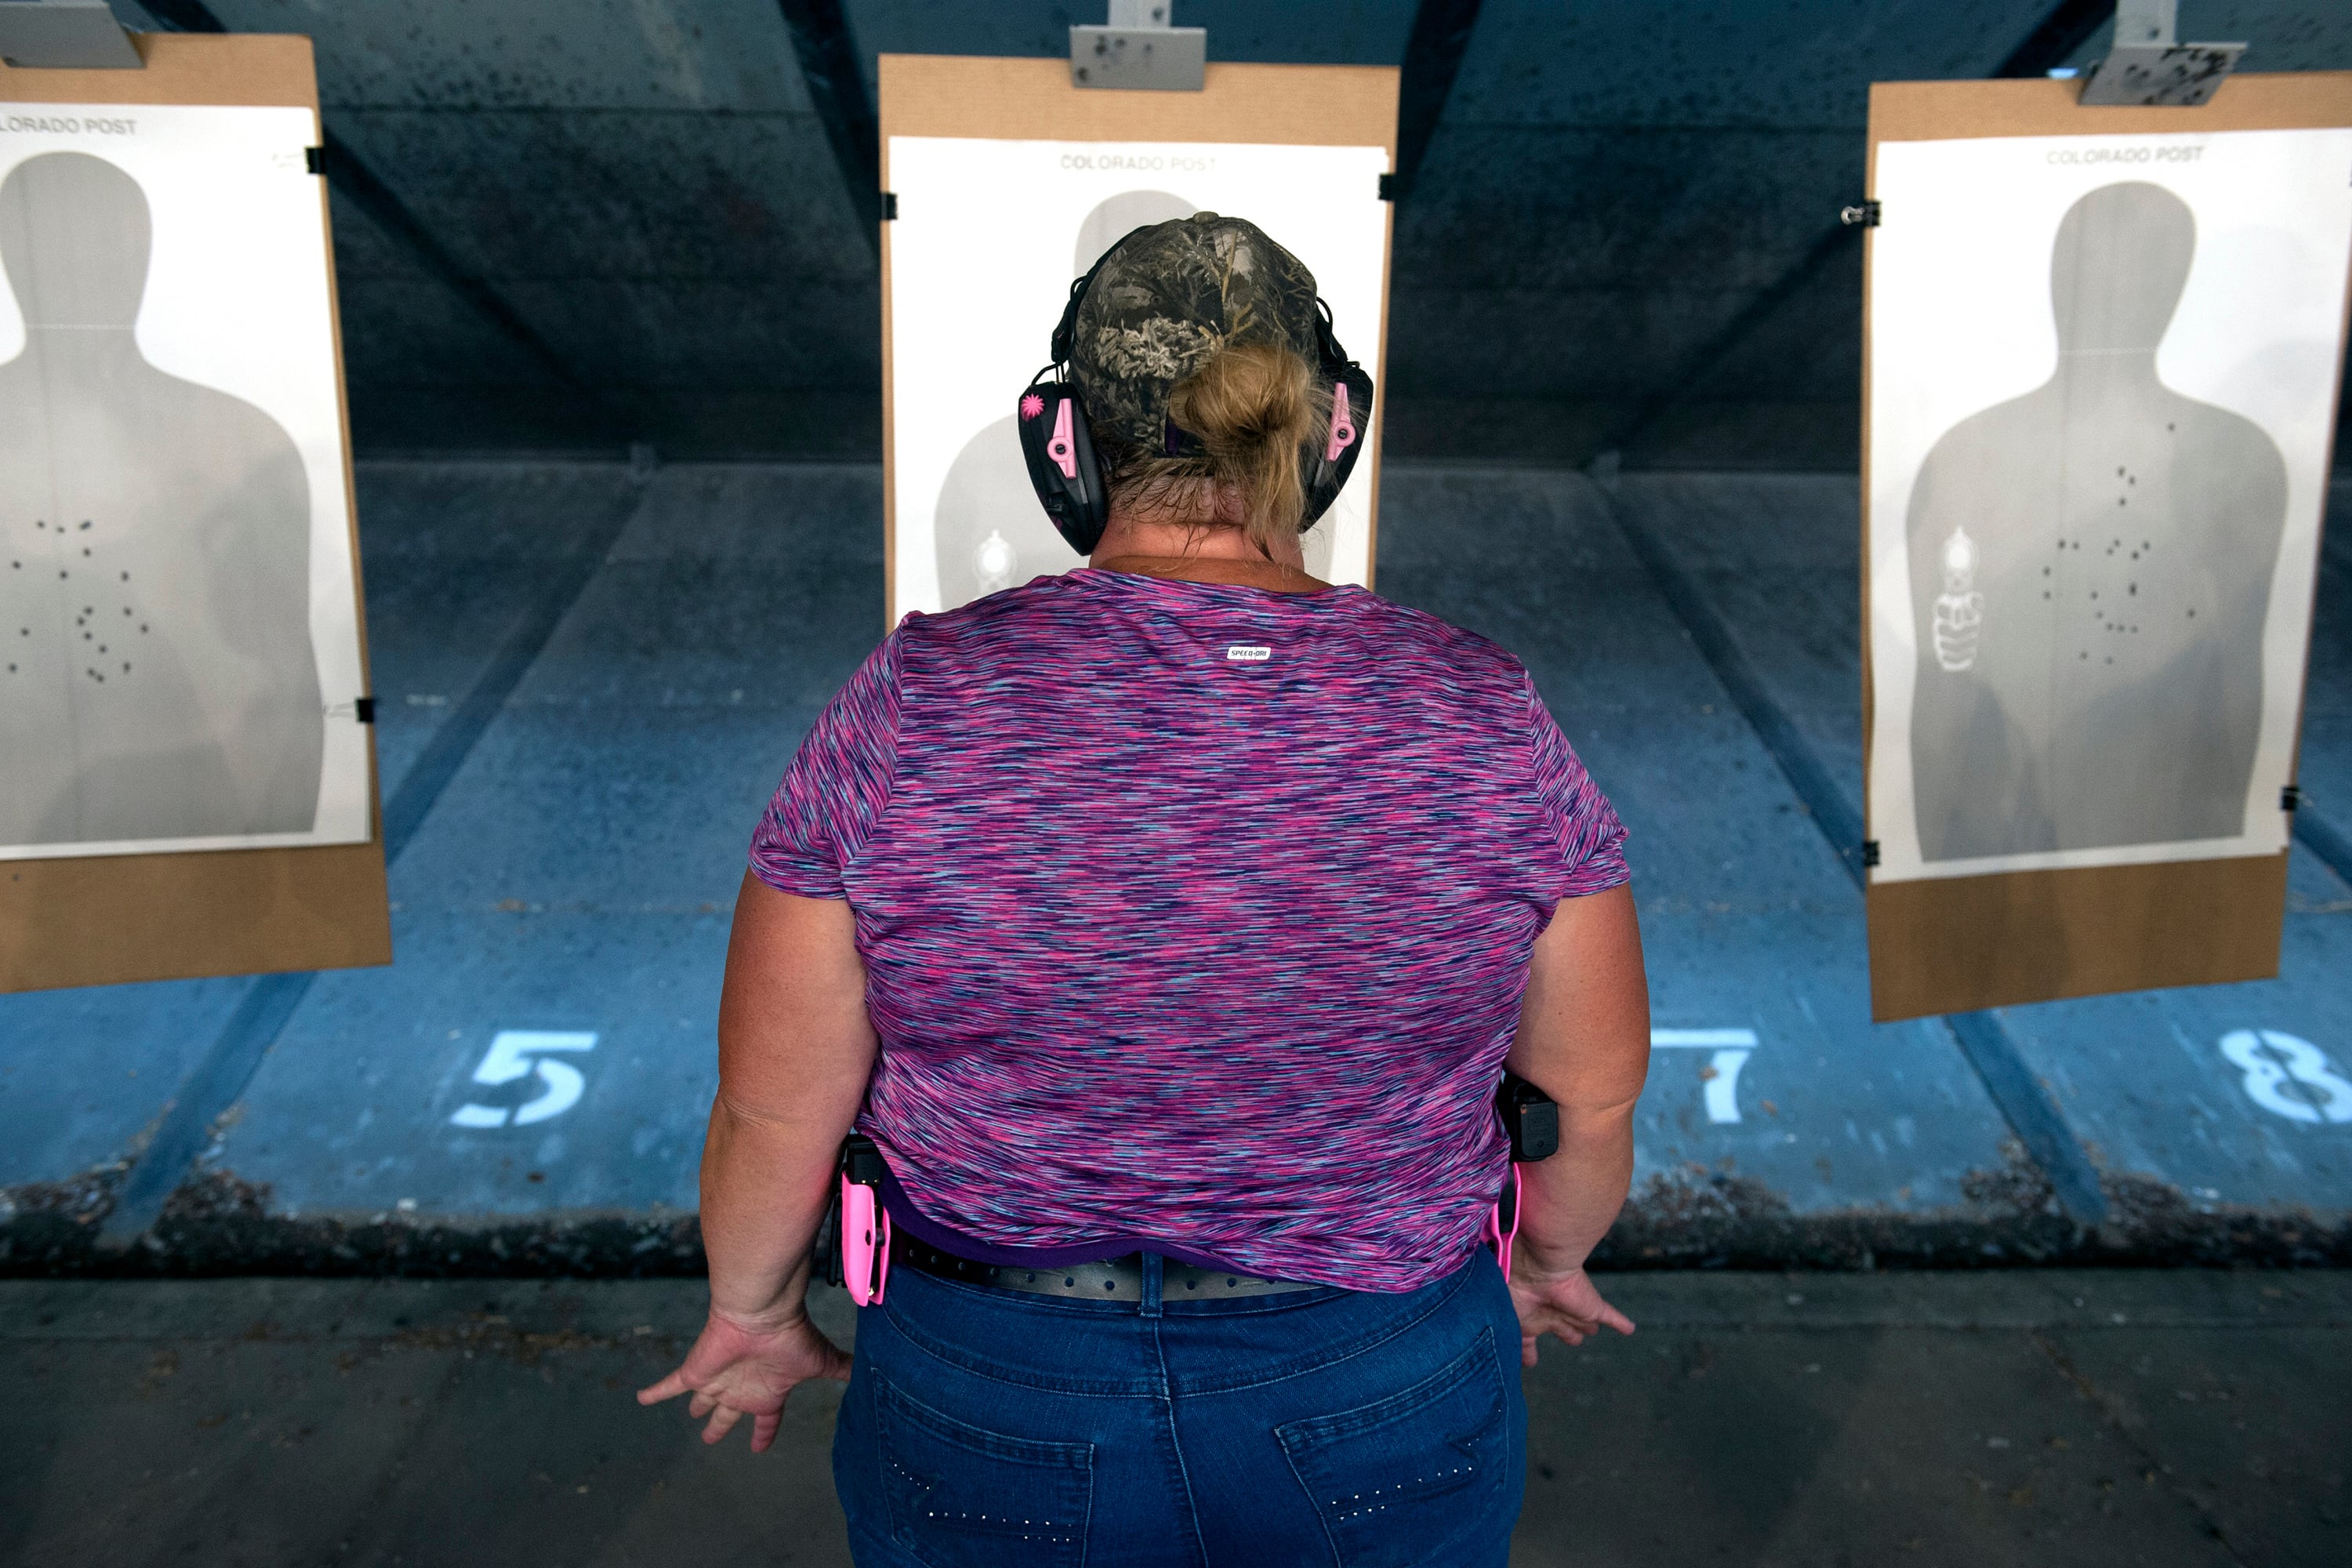 A woman wearing a purple shirt stands in front of three practice targets in a gun range.